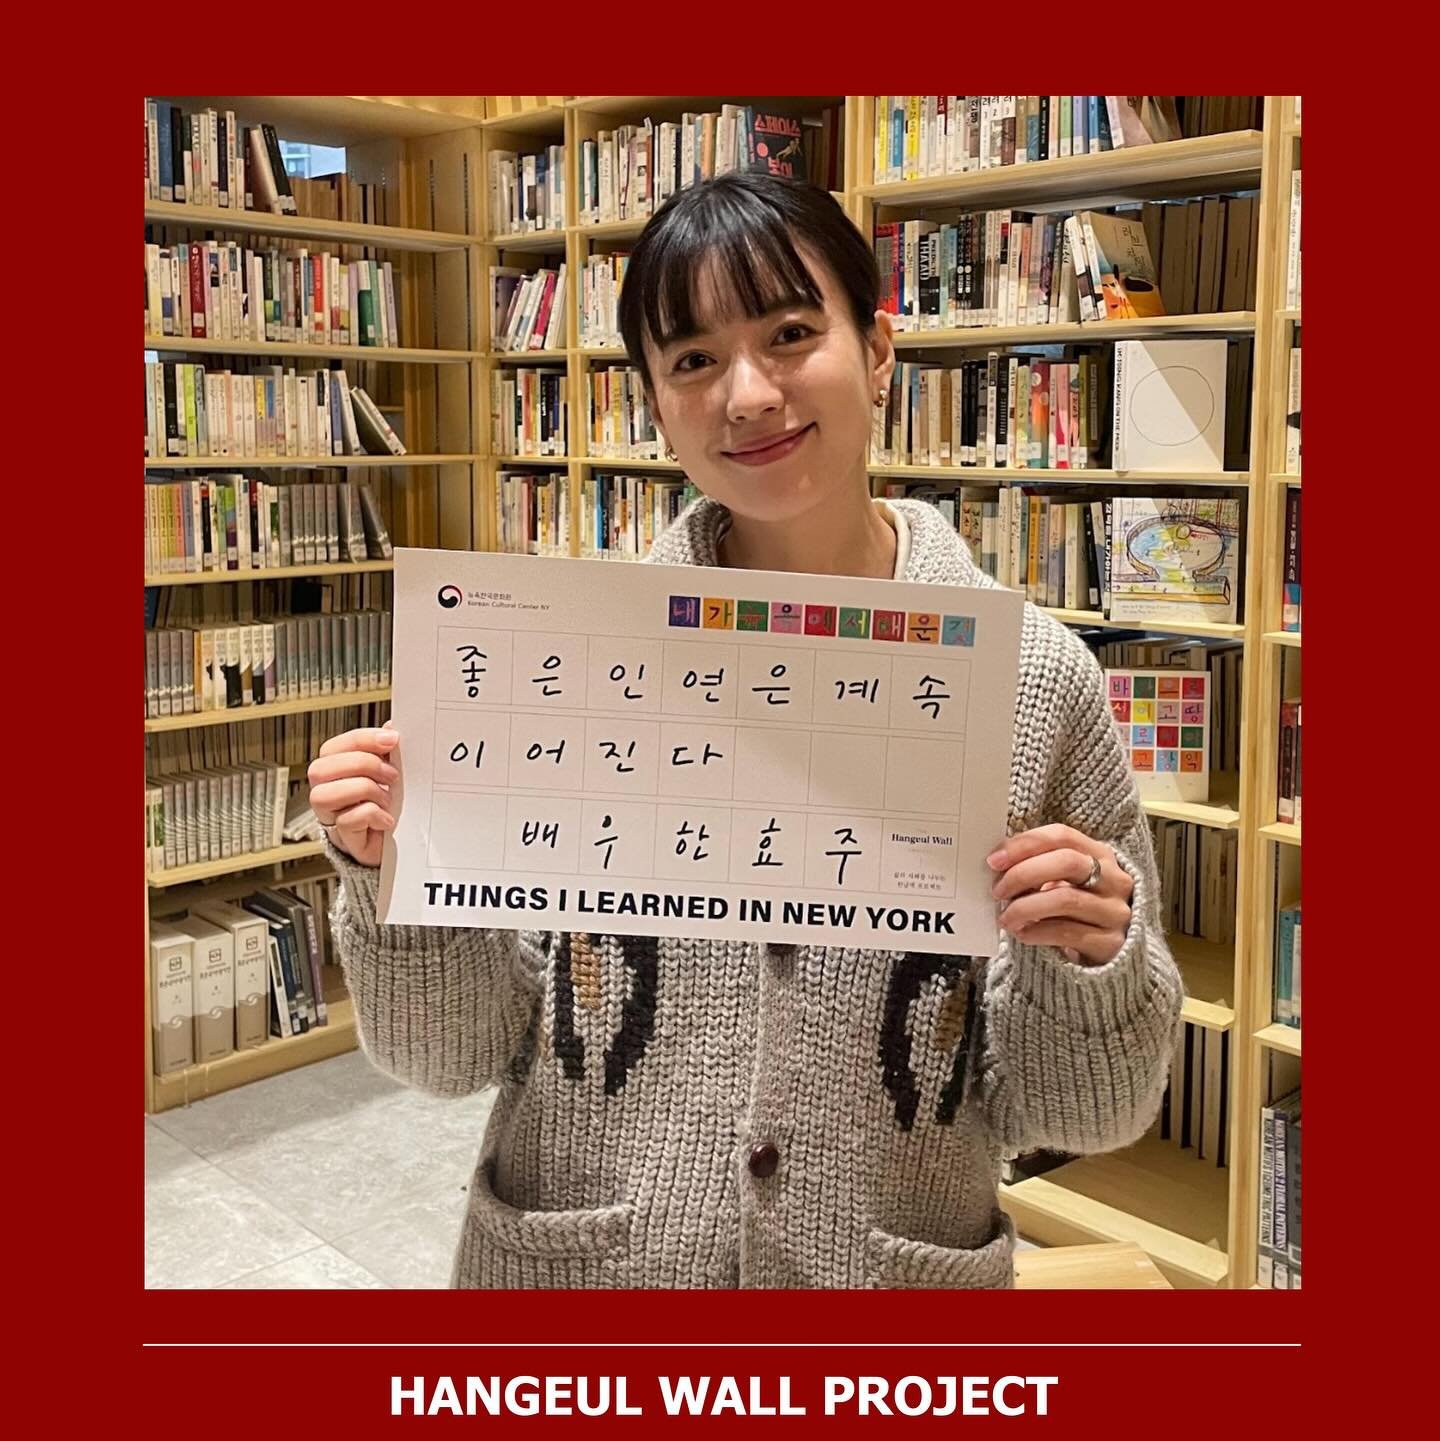 Han Hyo-joo(@hanhyojoo222) is a very special guest who has taken the time to share her immense interest in the Hanguel Wall project and her words of wisdom!

&ldquo;좋은 인연은 계속 이어진다&rdquo; 
&ldquo;Destined encounters continue to intertwine&rdquo;

&ldq